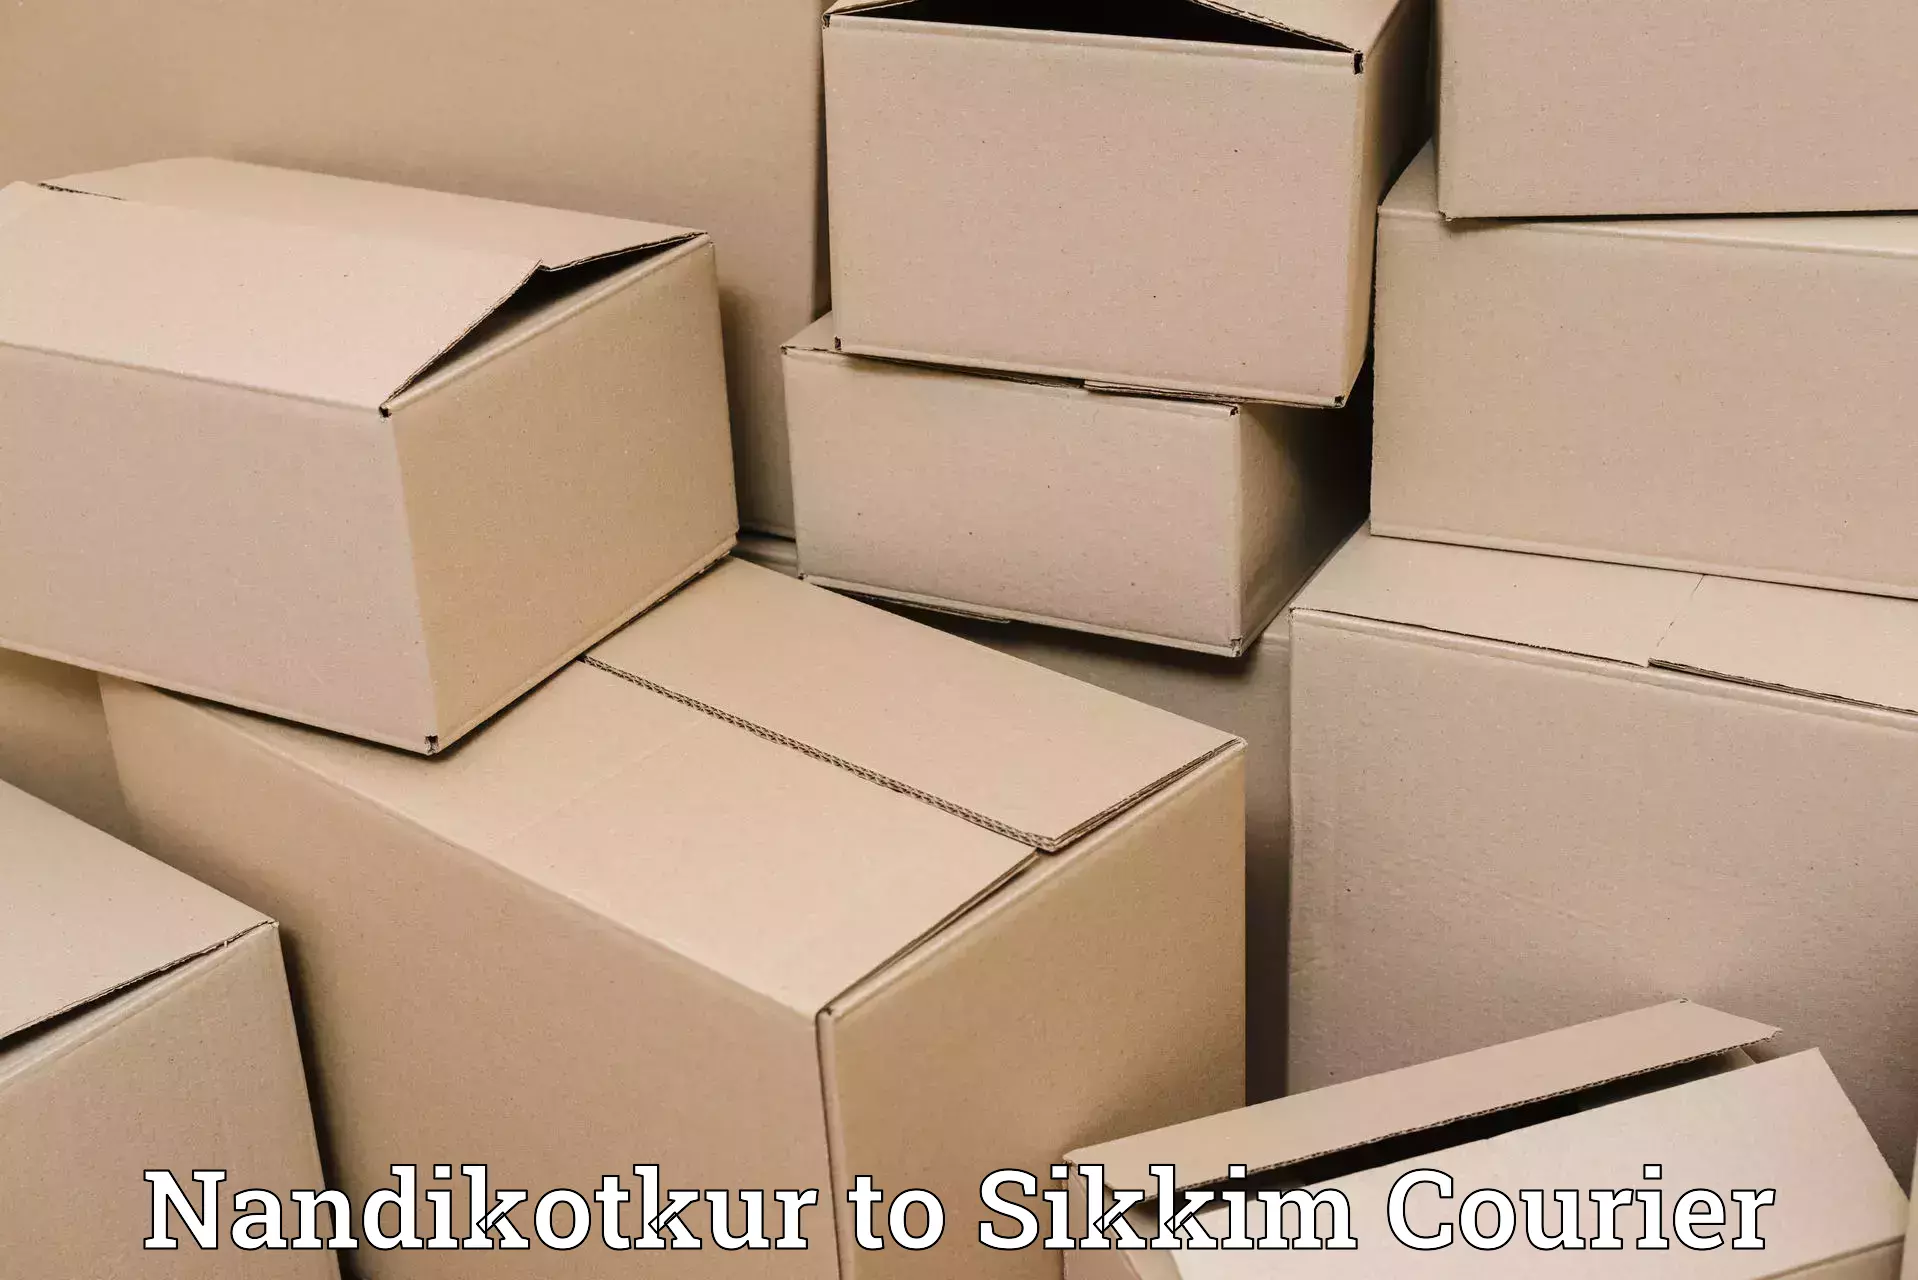 Holiday shipping services Nandikotkur to Pelling